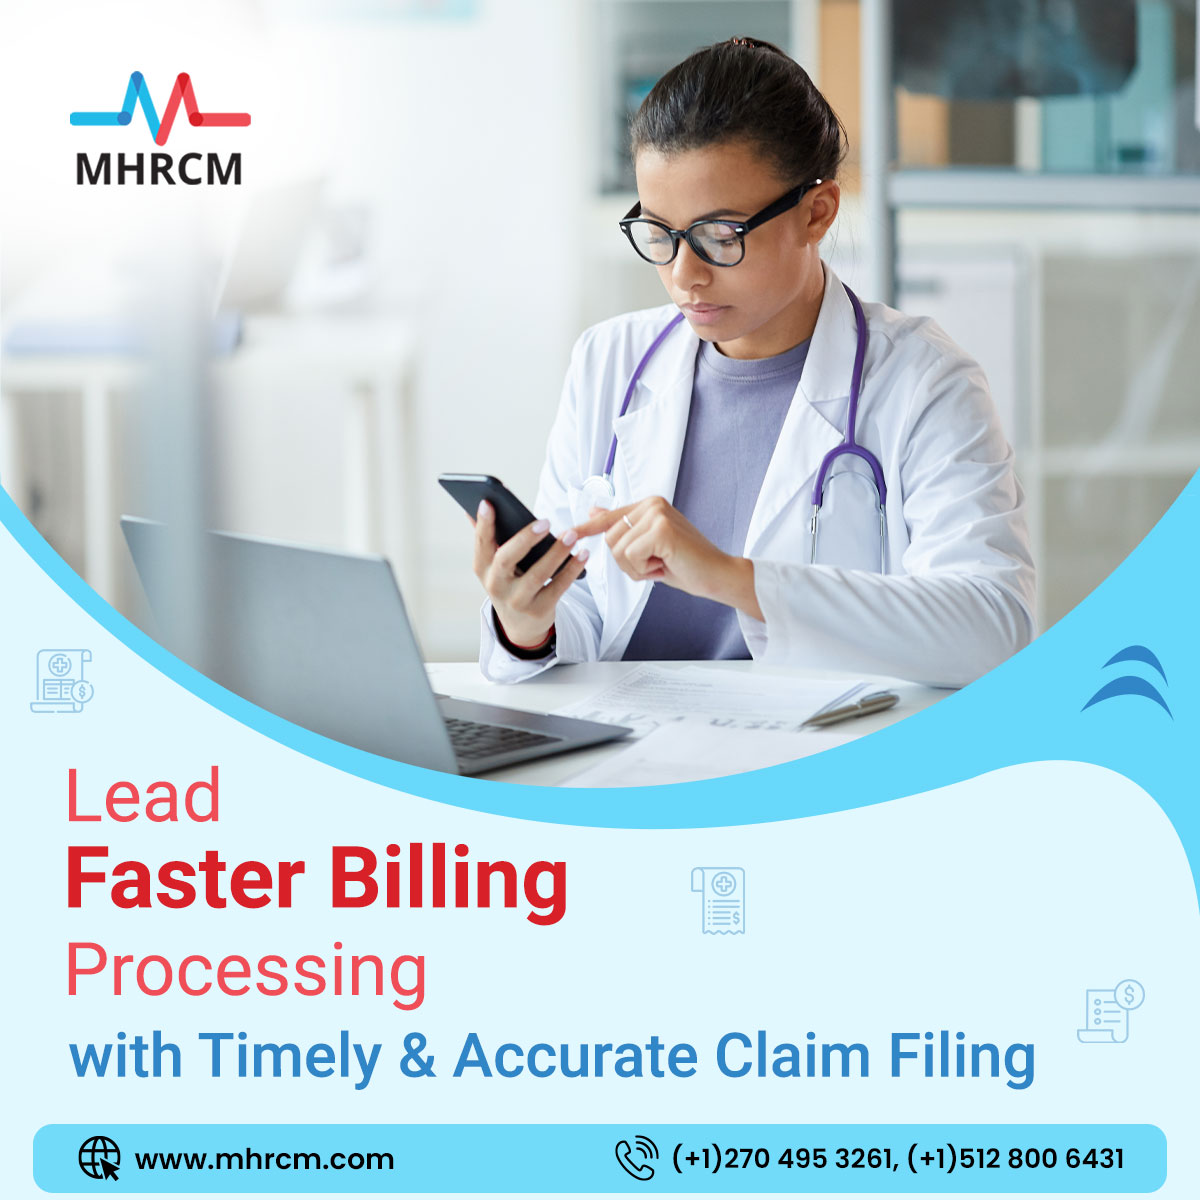 Accurate claim filing helps minimize errors. Submitting claims promptly increases the chances of receiving payment quickly from insurance companies or patients, improving cash flow for healthcare providers. #MedicalBilling | #Healthcare | #Claims | #HealthcareProviders | #MHRCM